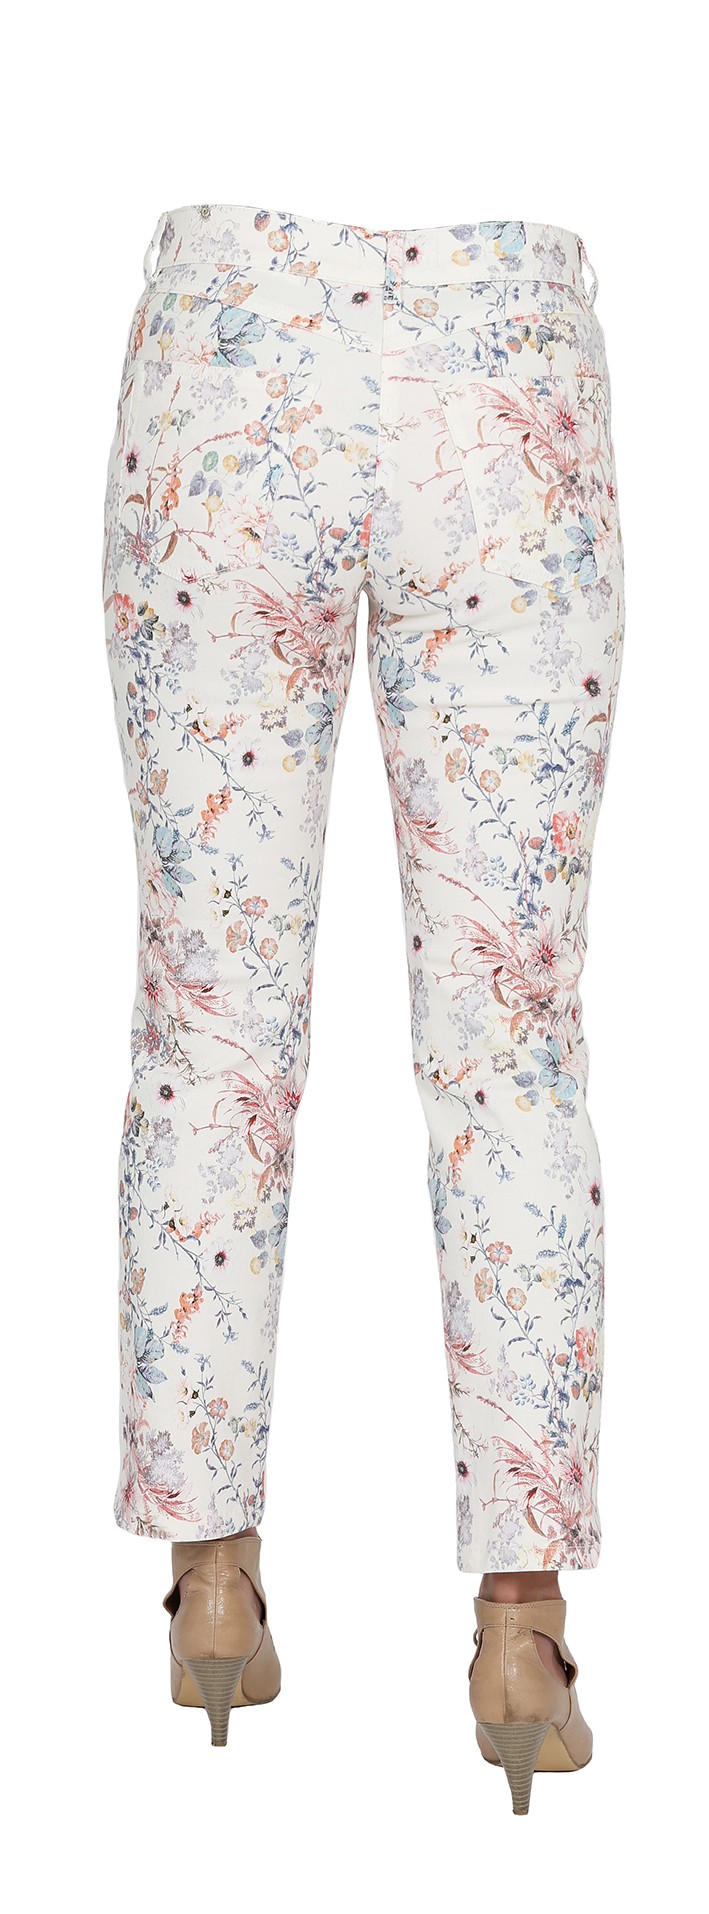 Bloomers - women's trousers with floral pattern-